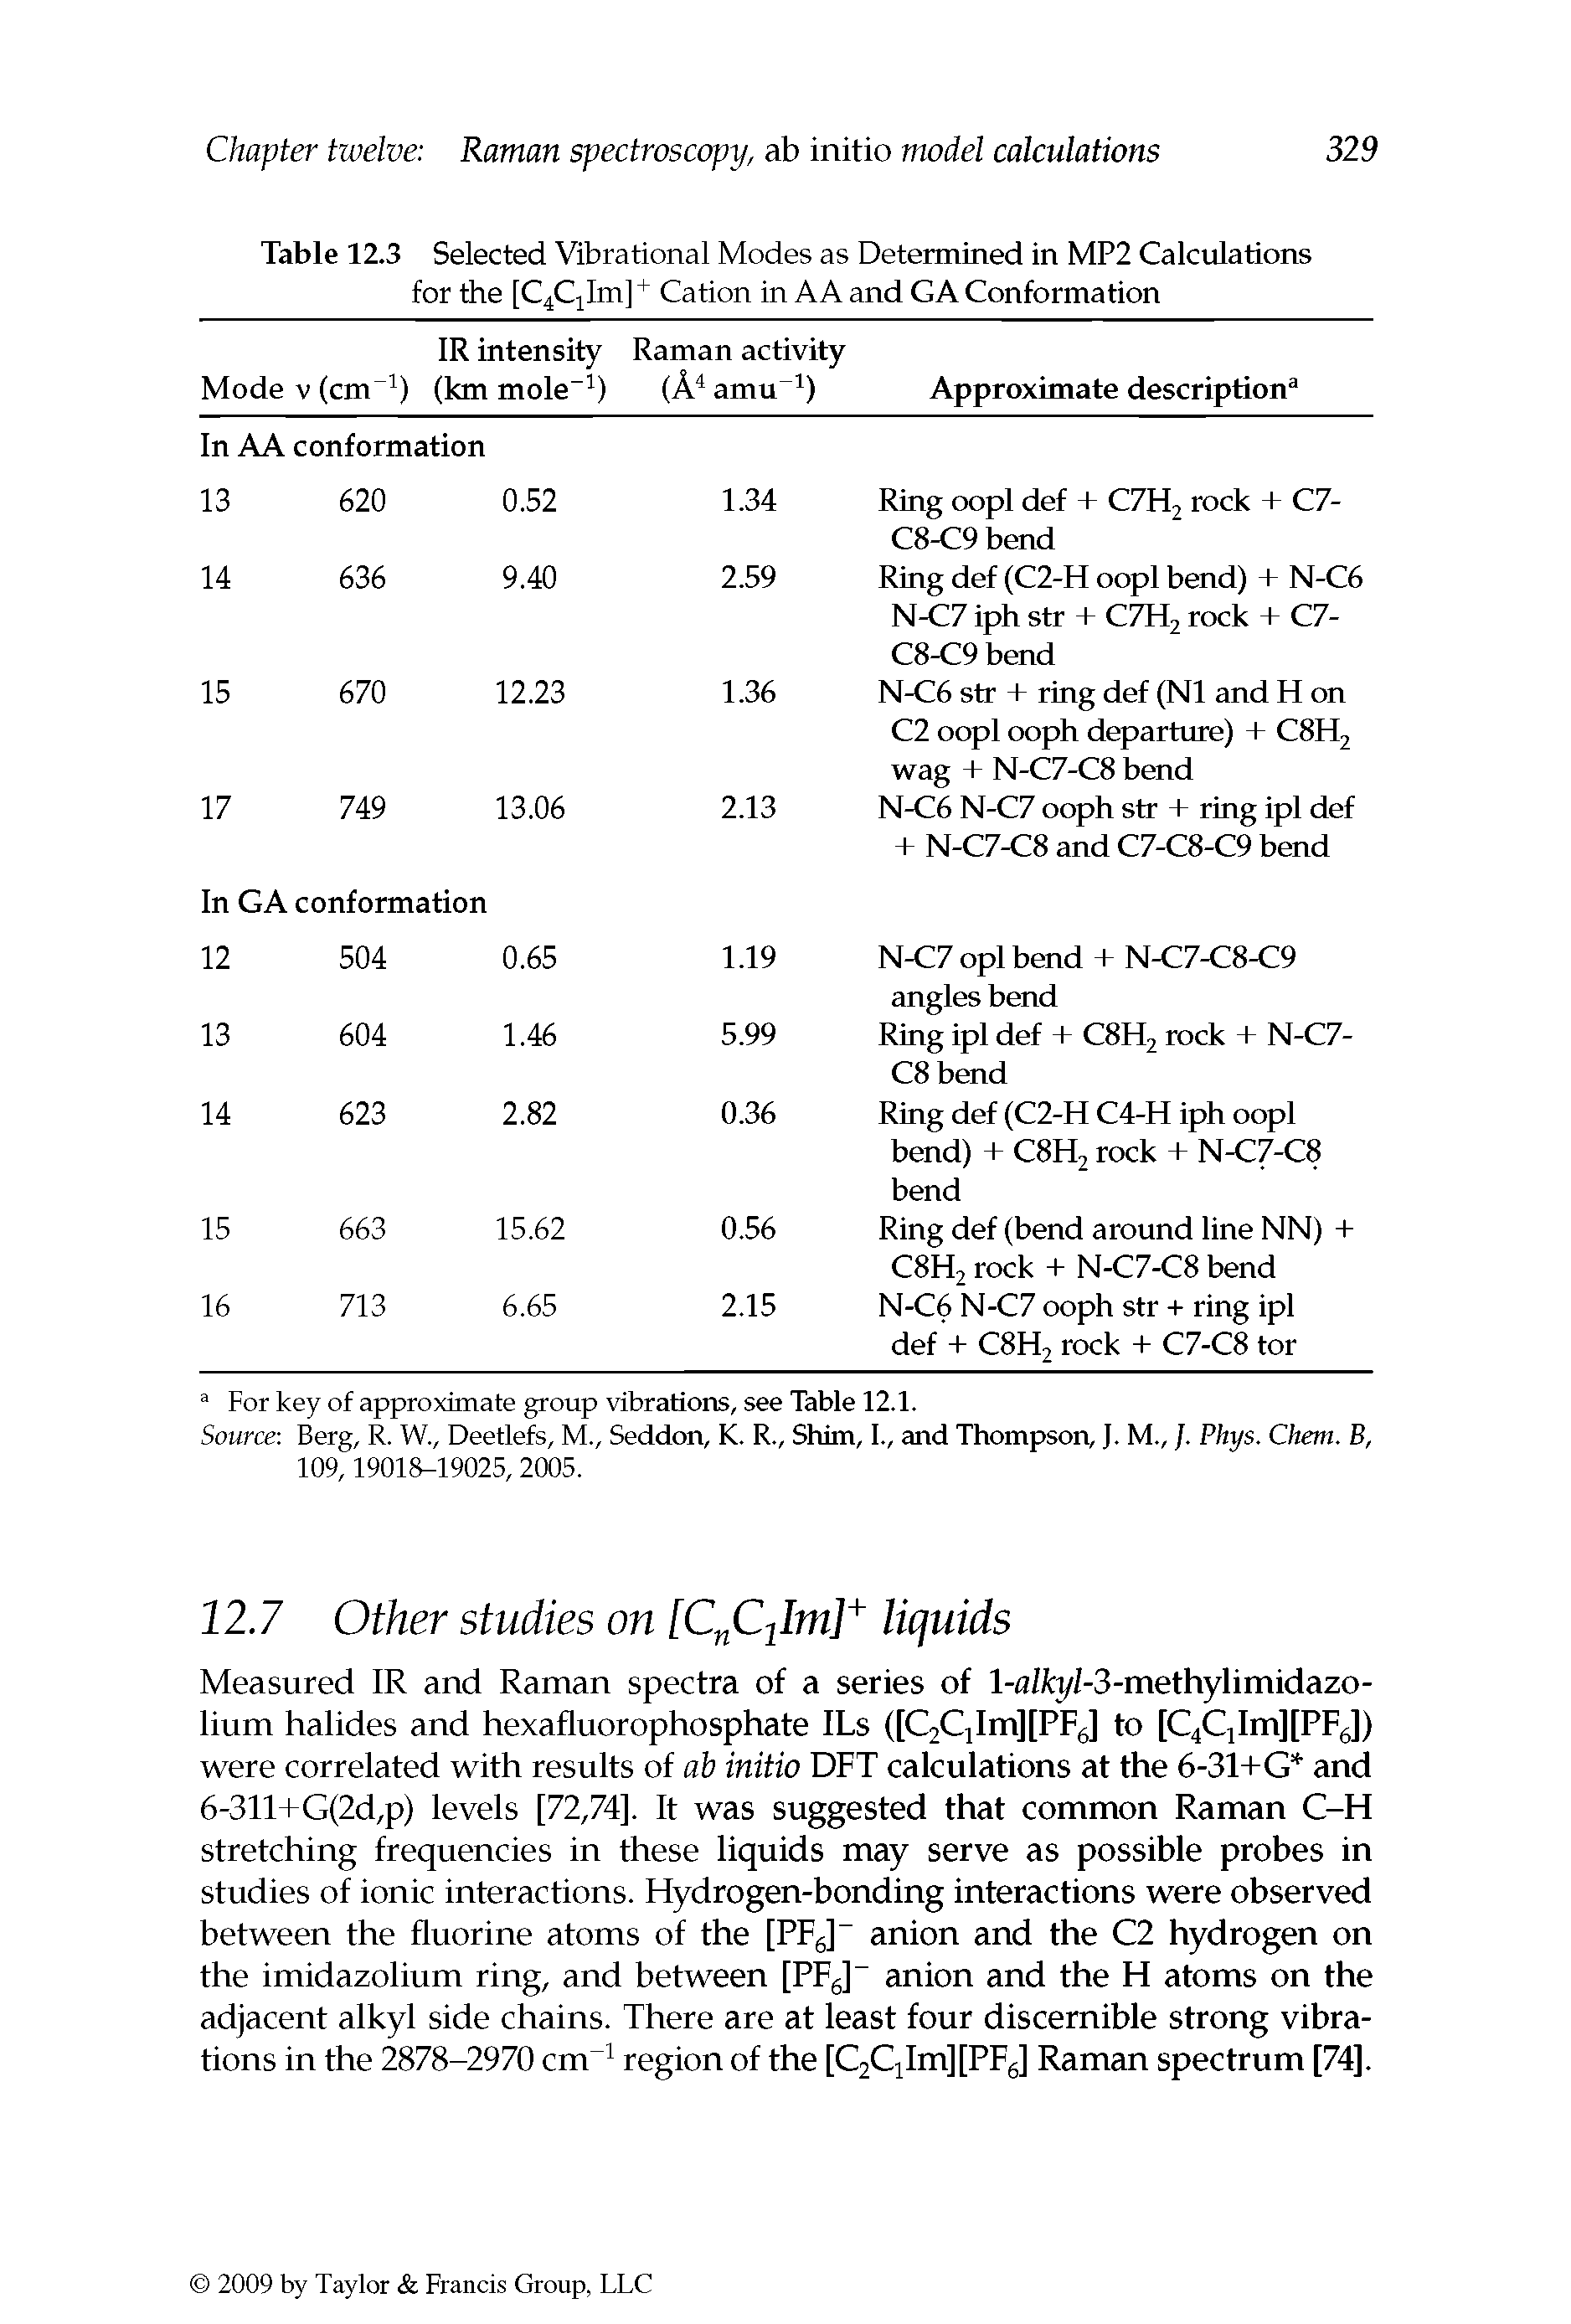 Table 12.3 Selected Vibrational Modes as Determined in MP2 Calculations for the [C4Cilm] + Cation in A A and GA Conformation...